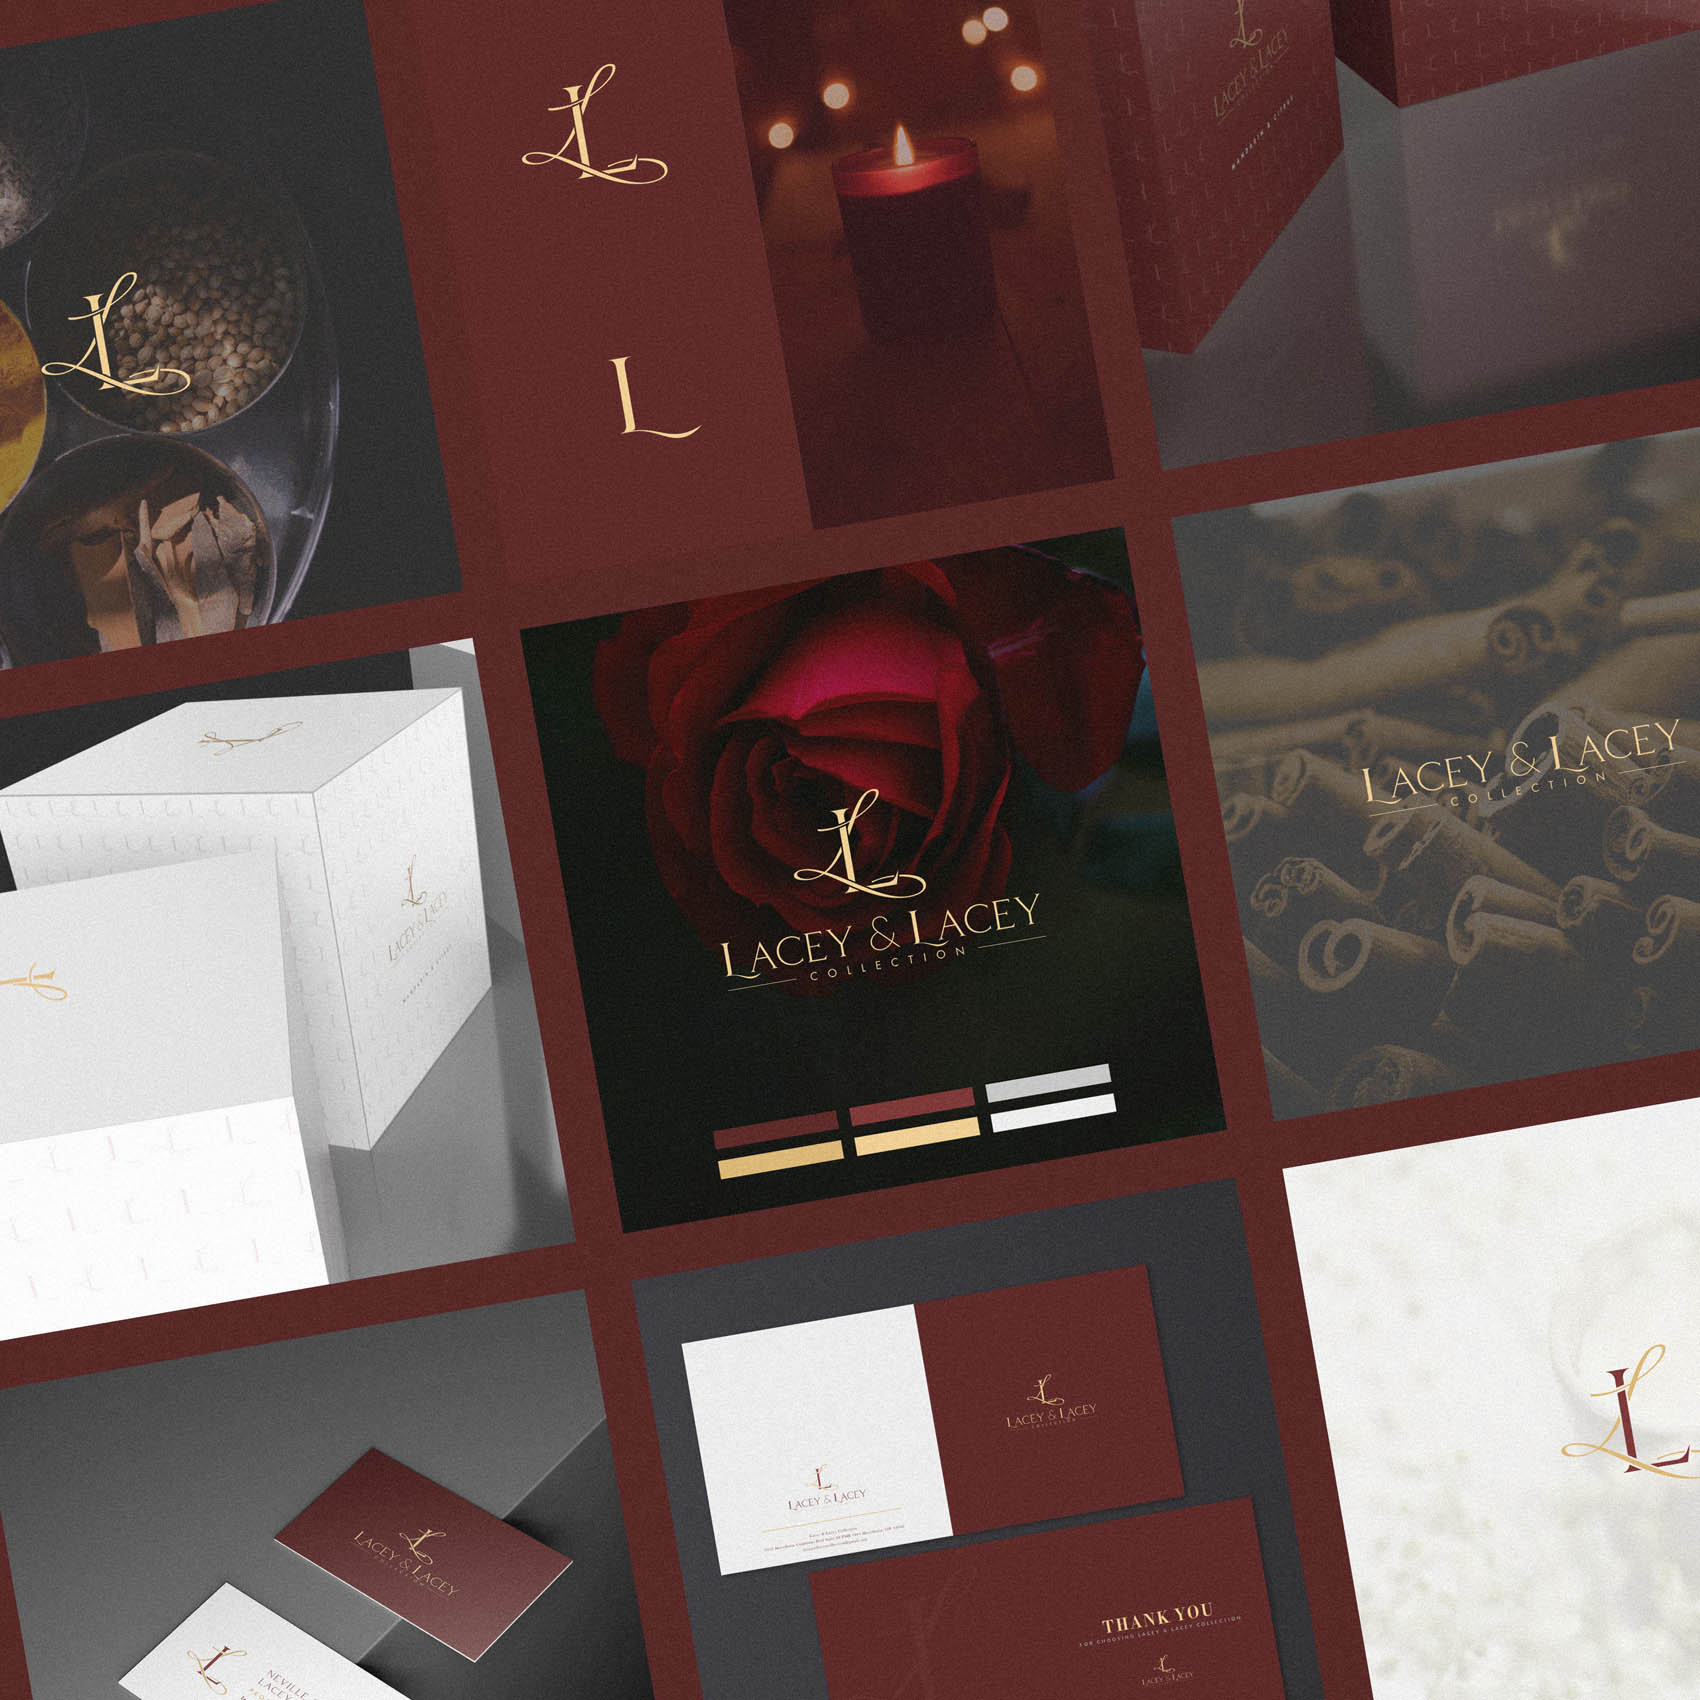 Lacey & Lacey - Luxury Candle Packaging Logo & Brand Identity21